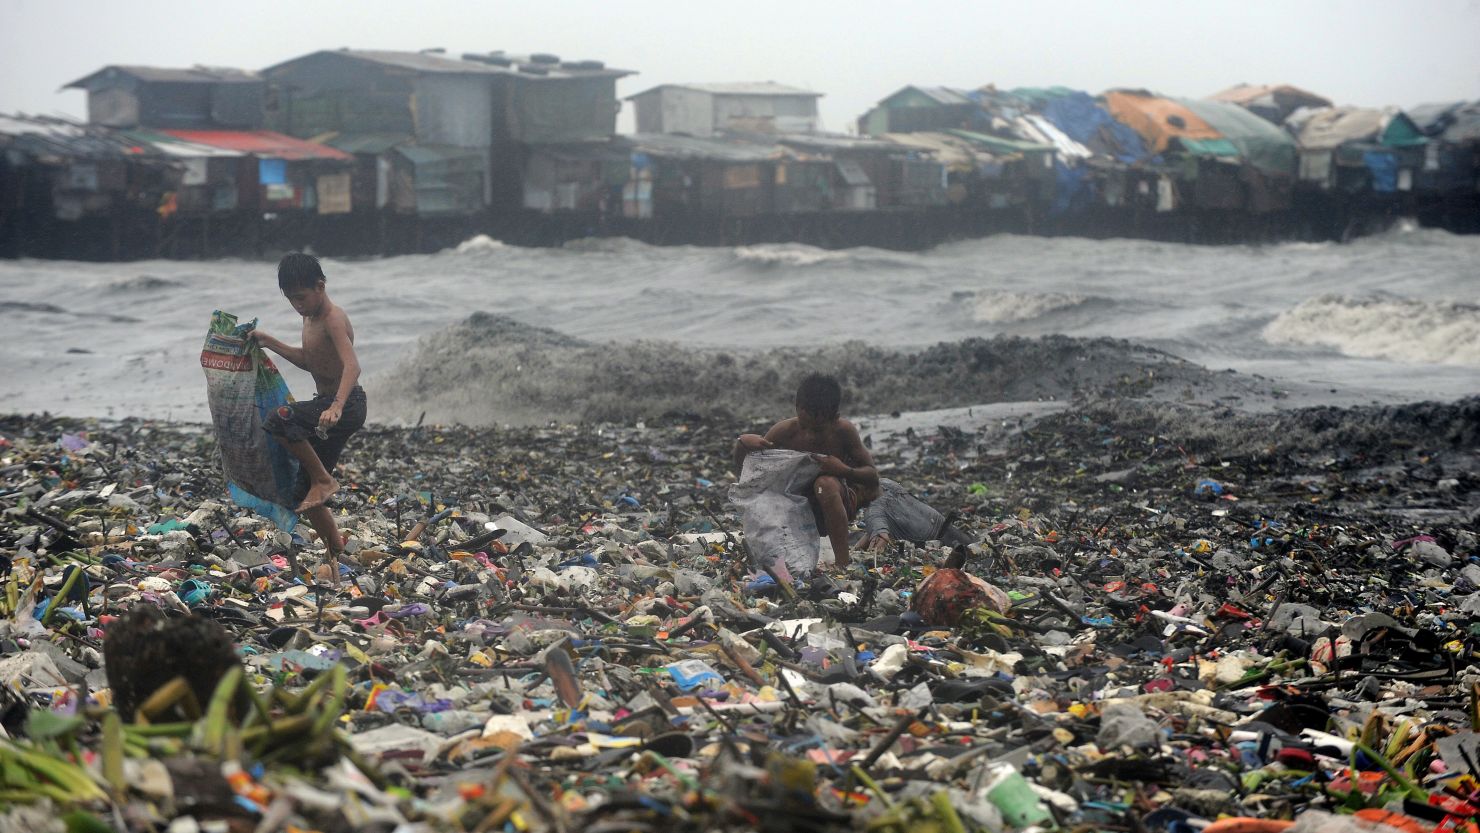 Children looking for usable materials among the garbage after a typhoon in Manila Bay, Philippines.